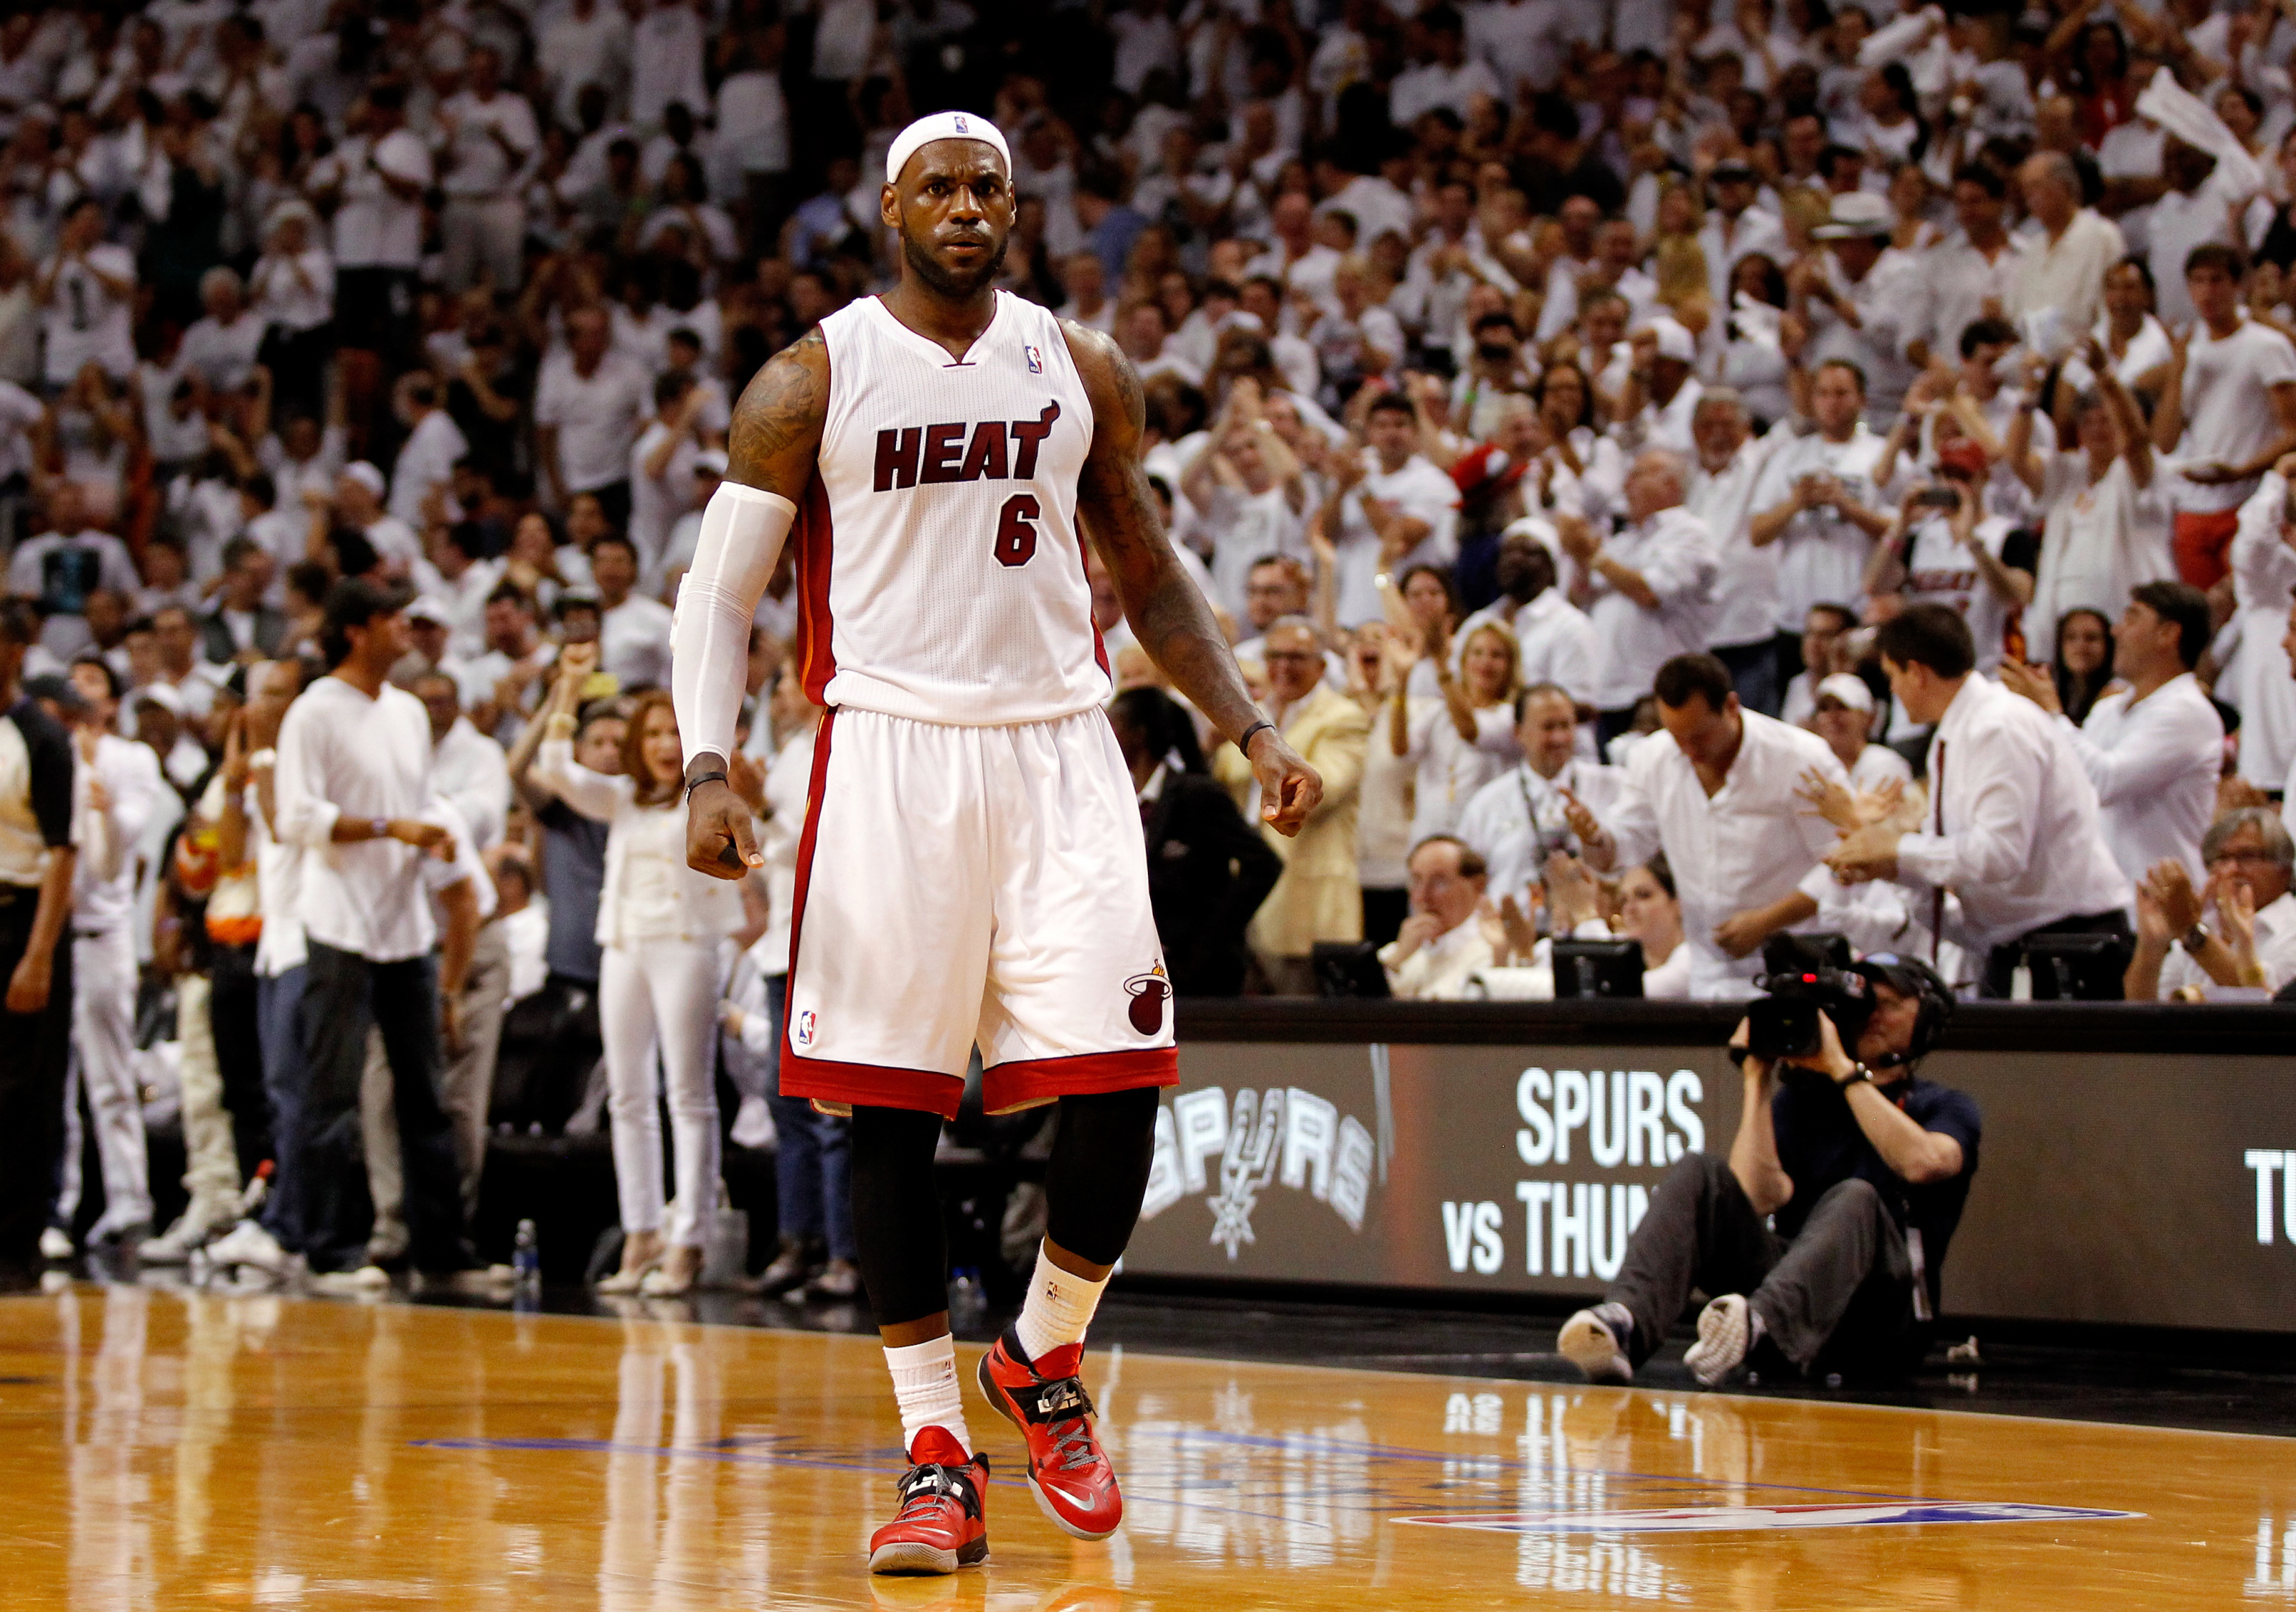 Miami Heat: LeBron James and Michael Jordan also have this in common